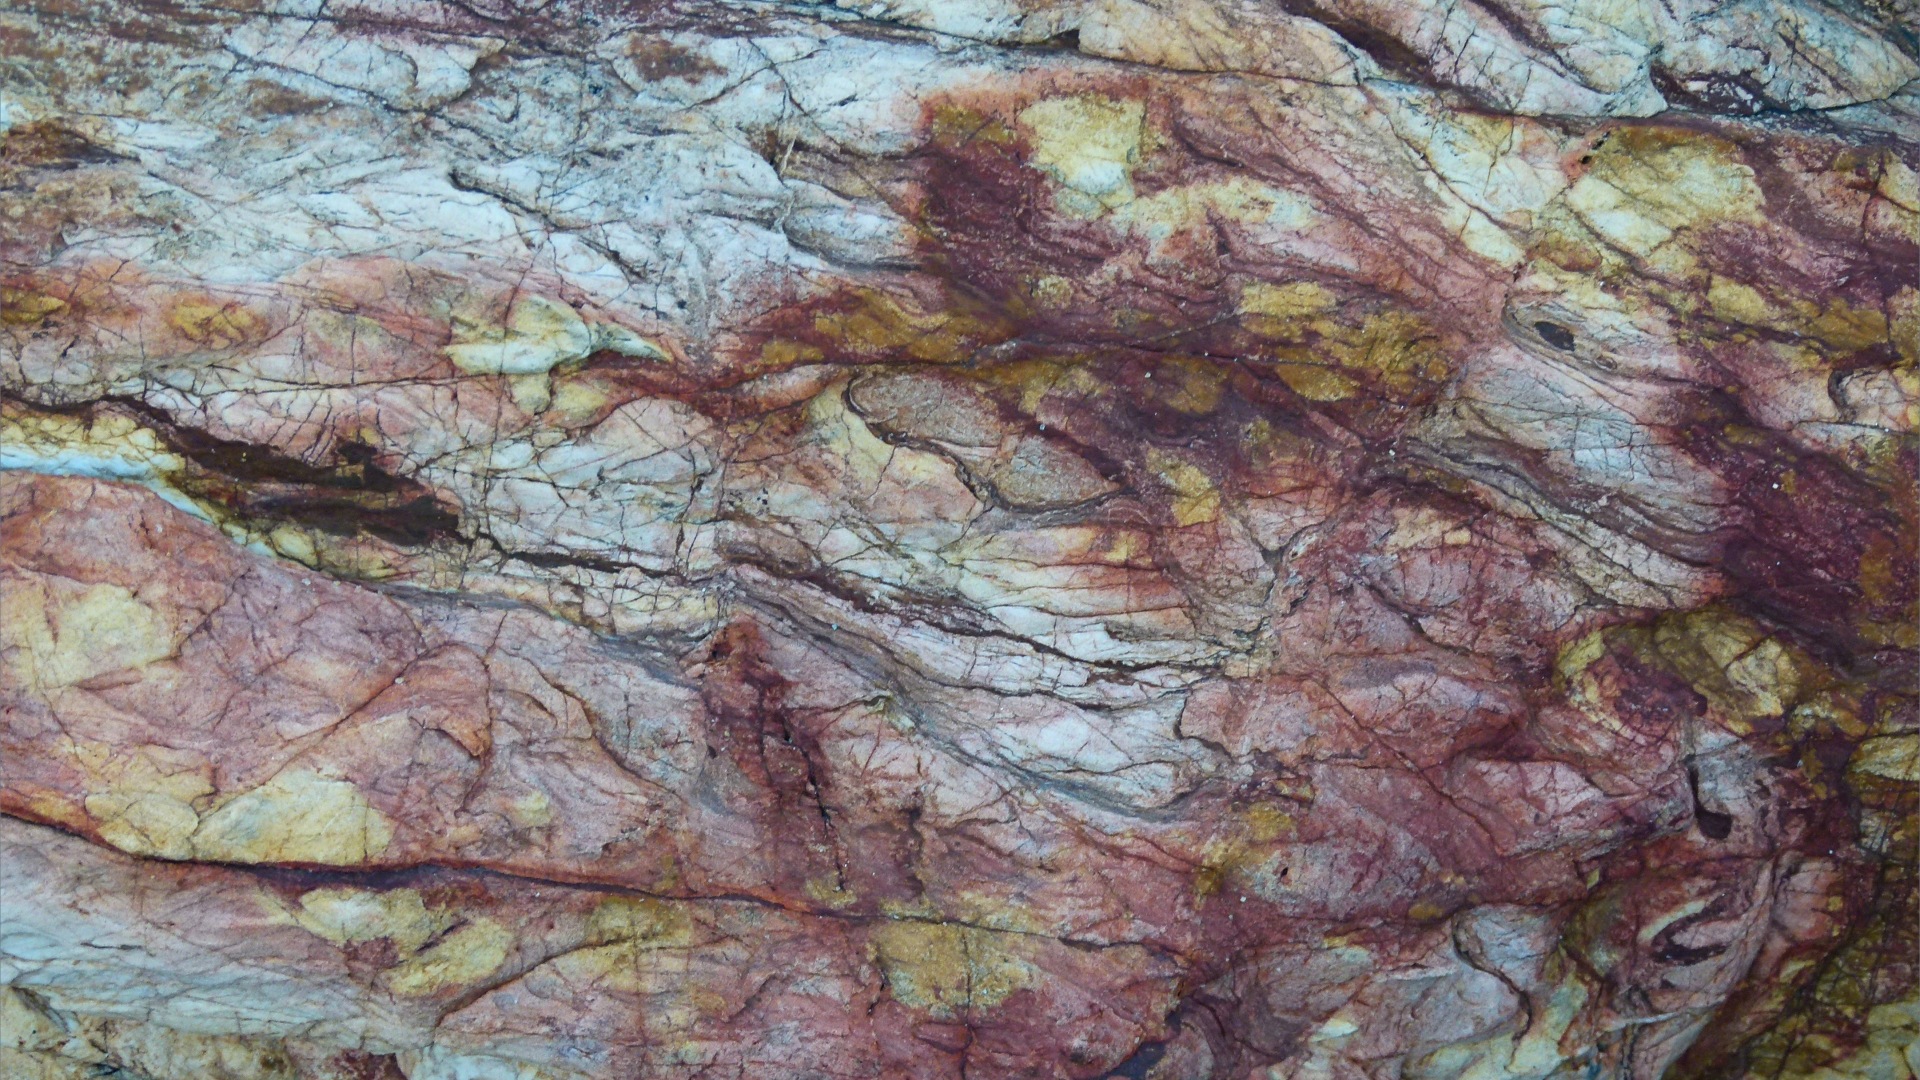 Close-up of rock pattern and texture